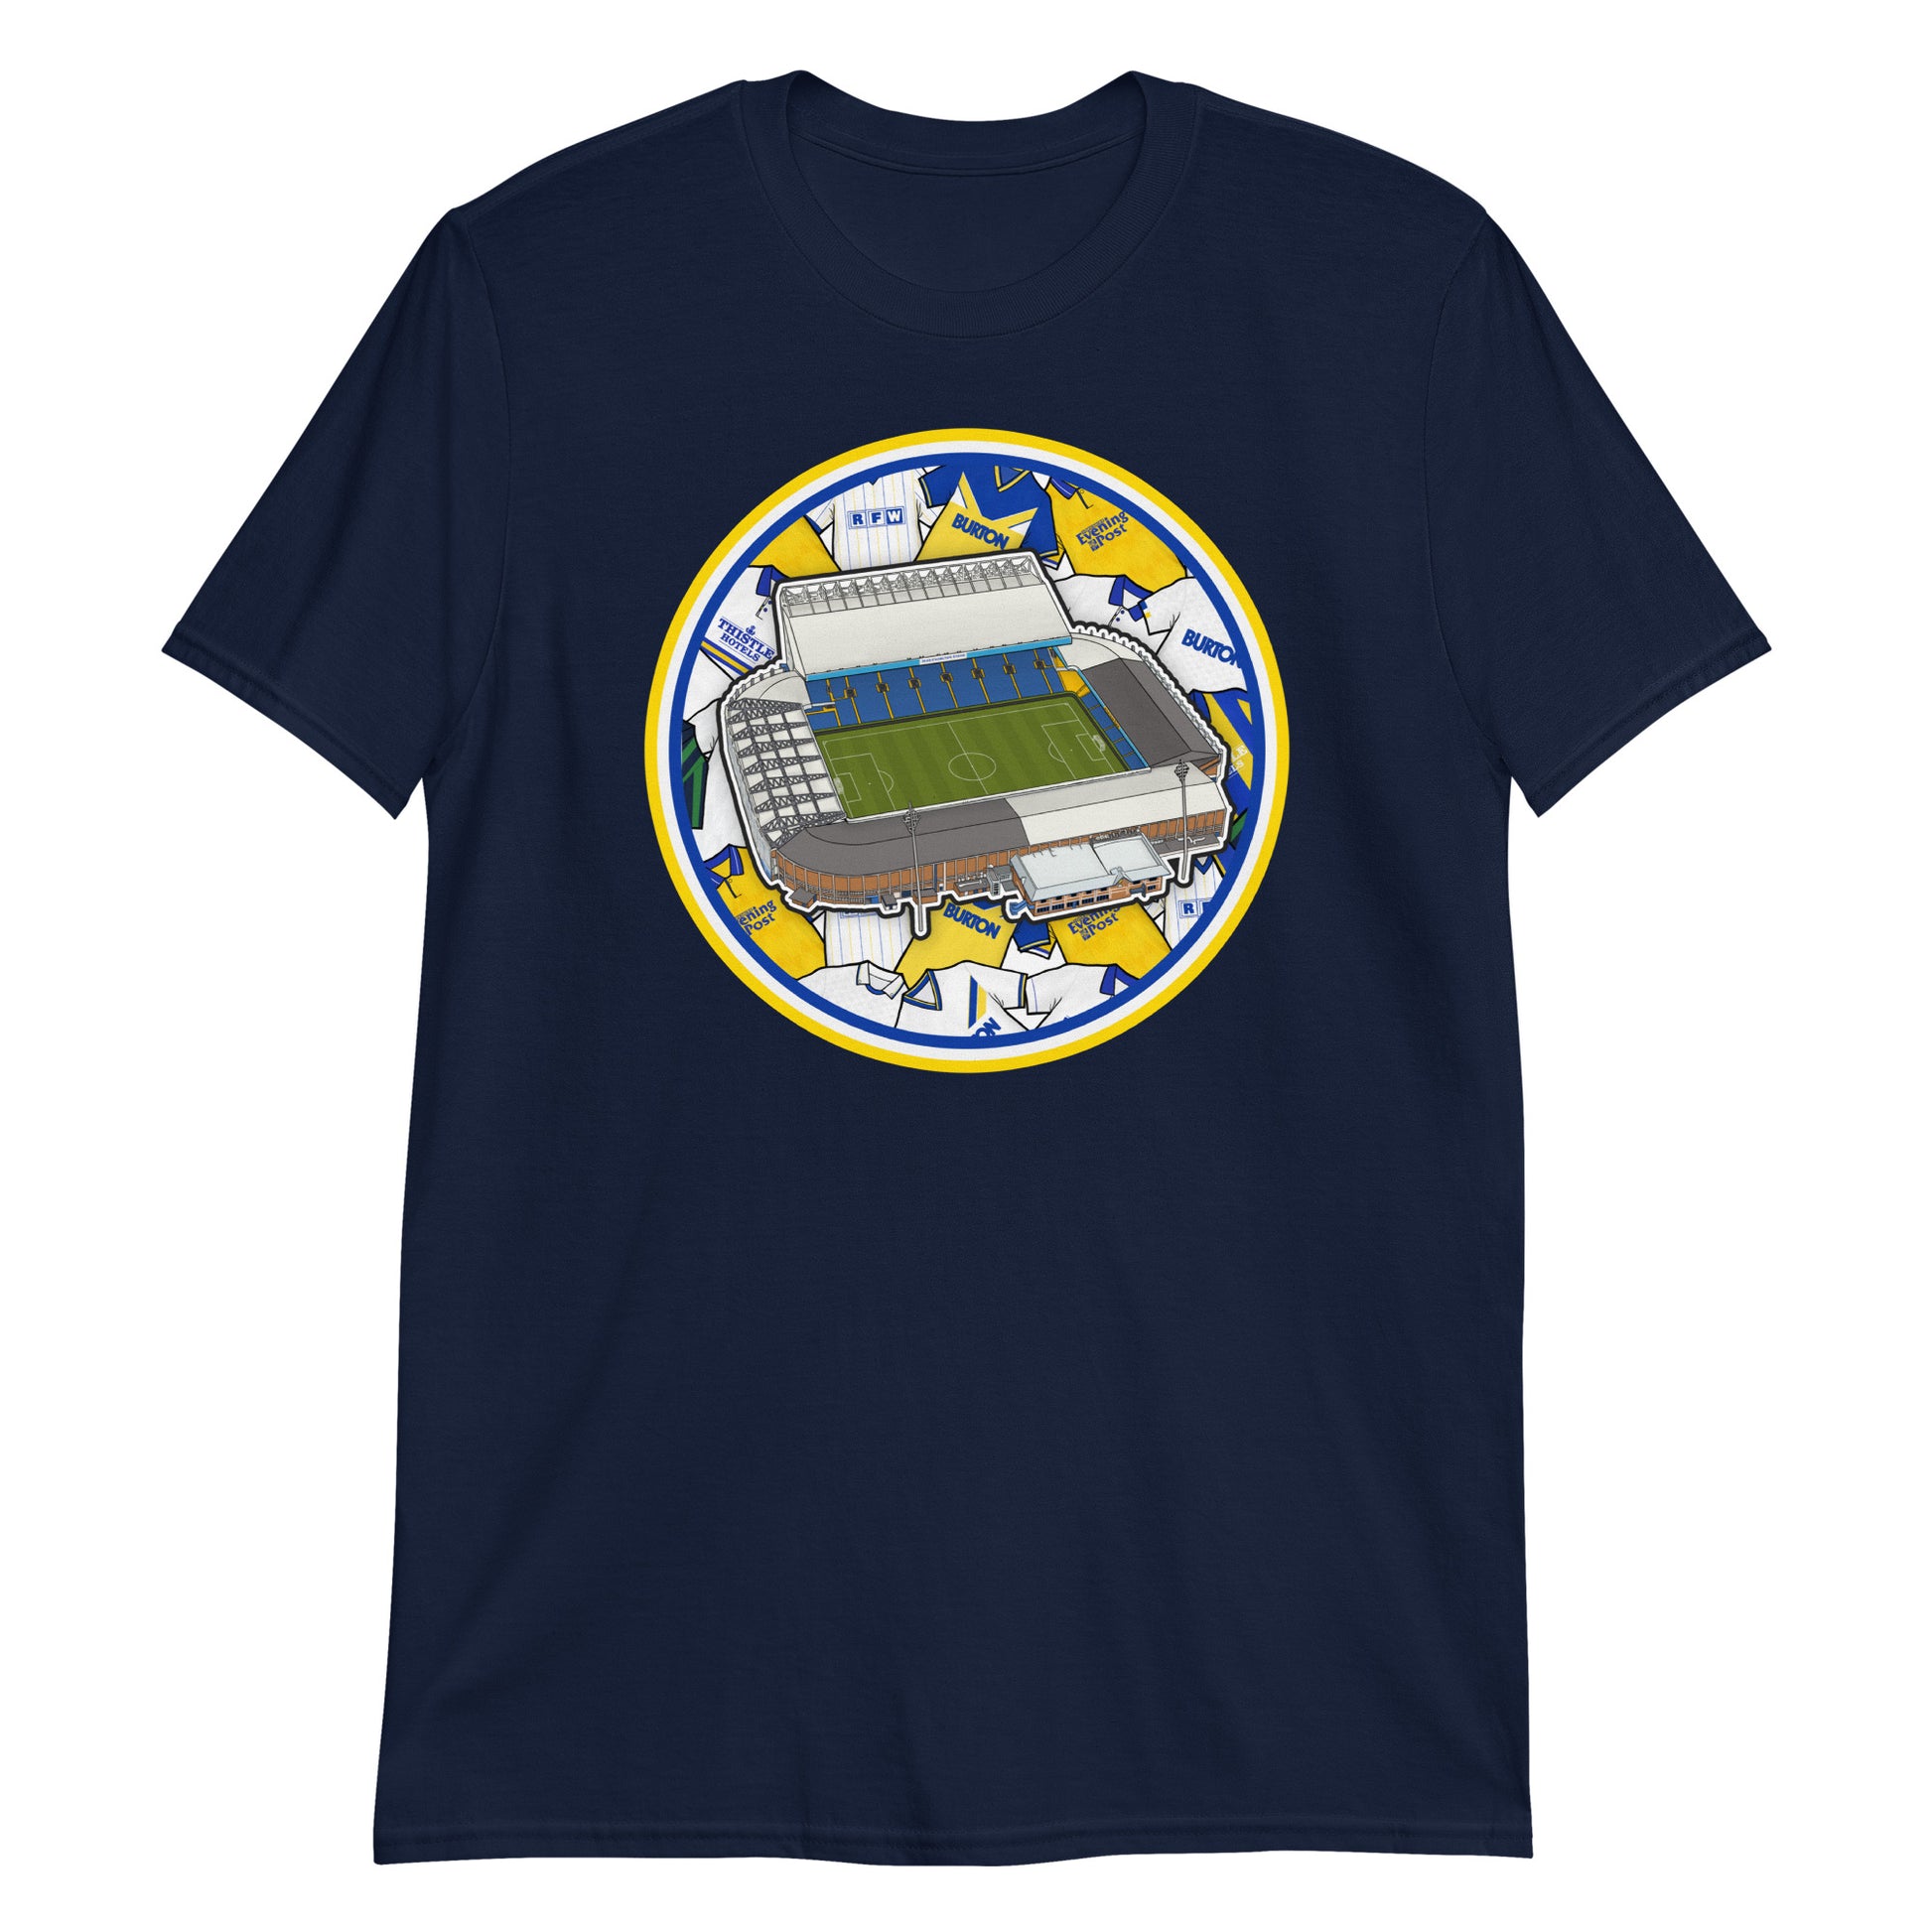 Navy Blue Retro themed Leeds United inspired T-shirt featuring the iconic Elland Road Stadium & historic jerseys in the background